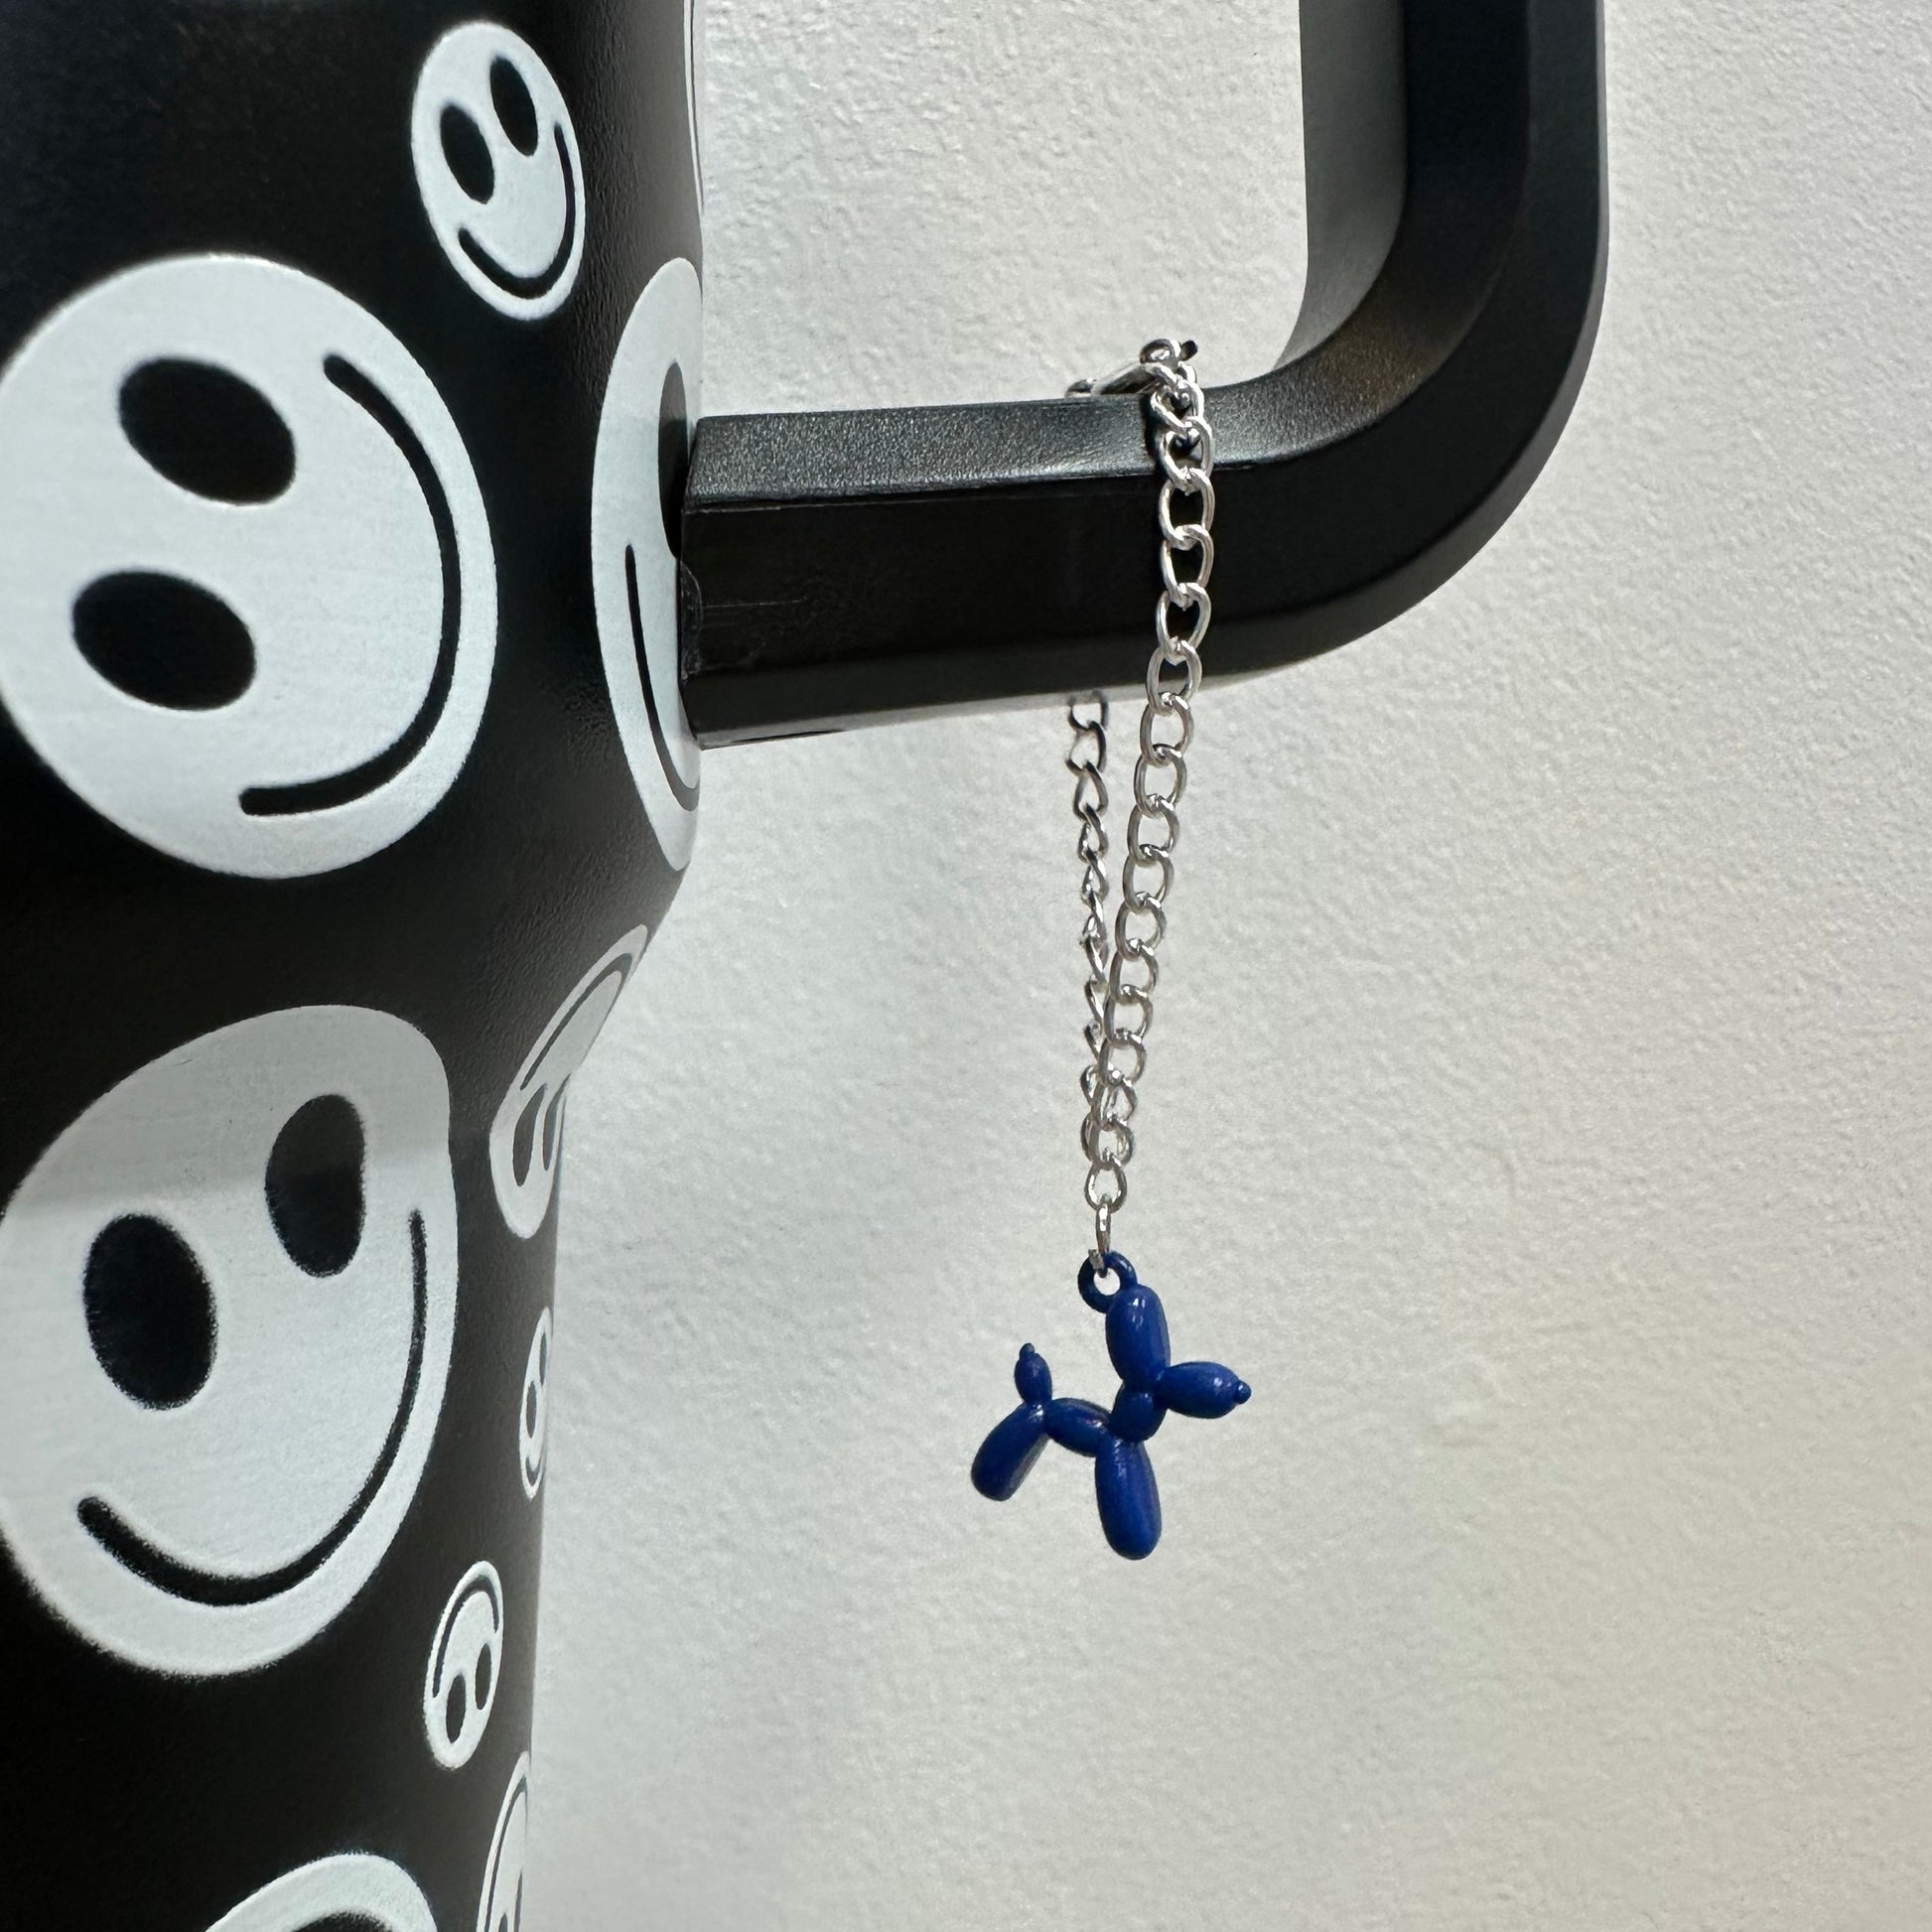 Balloon Dog Tumbler or Water Bottle Charm in Blue